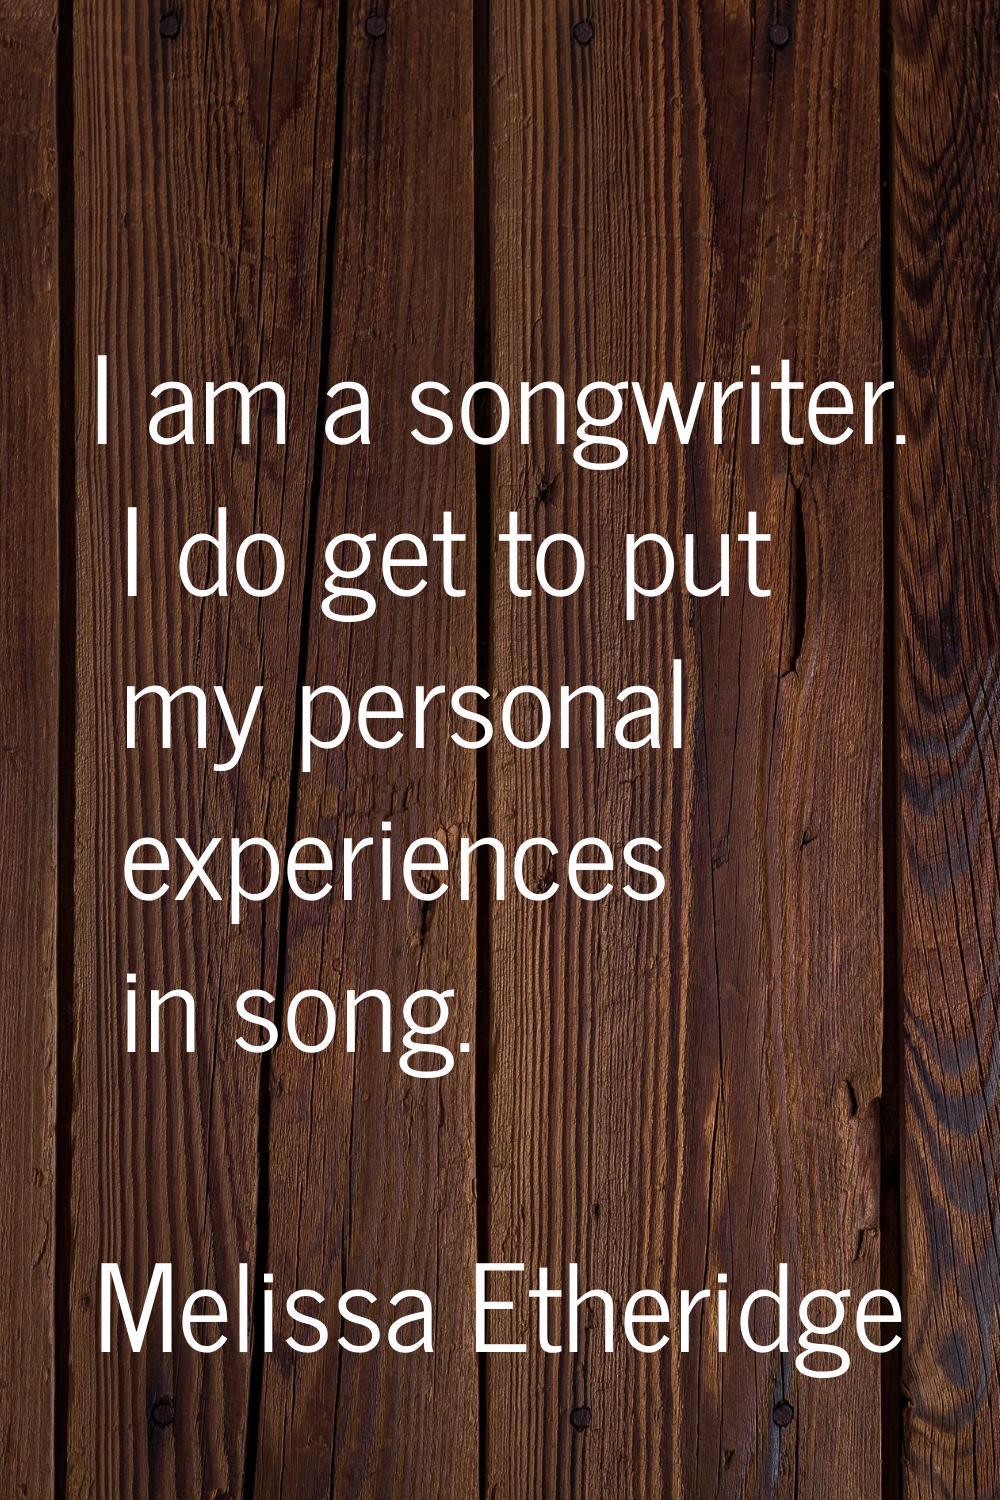 I am a songwriter. I do get to put my personal experiences in song.